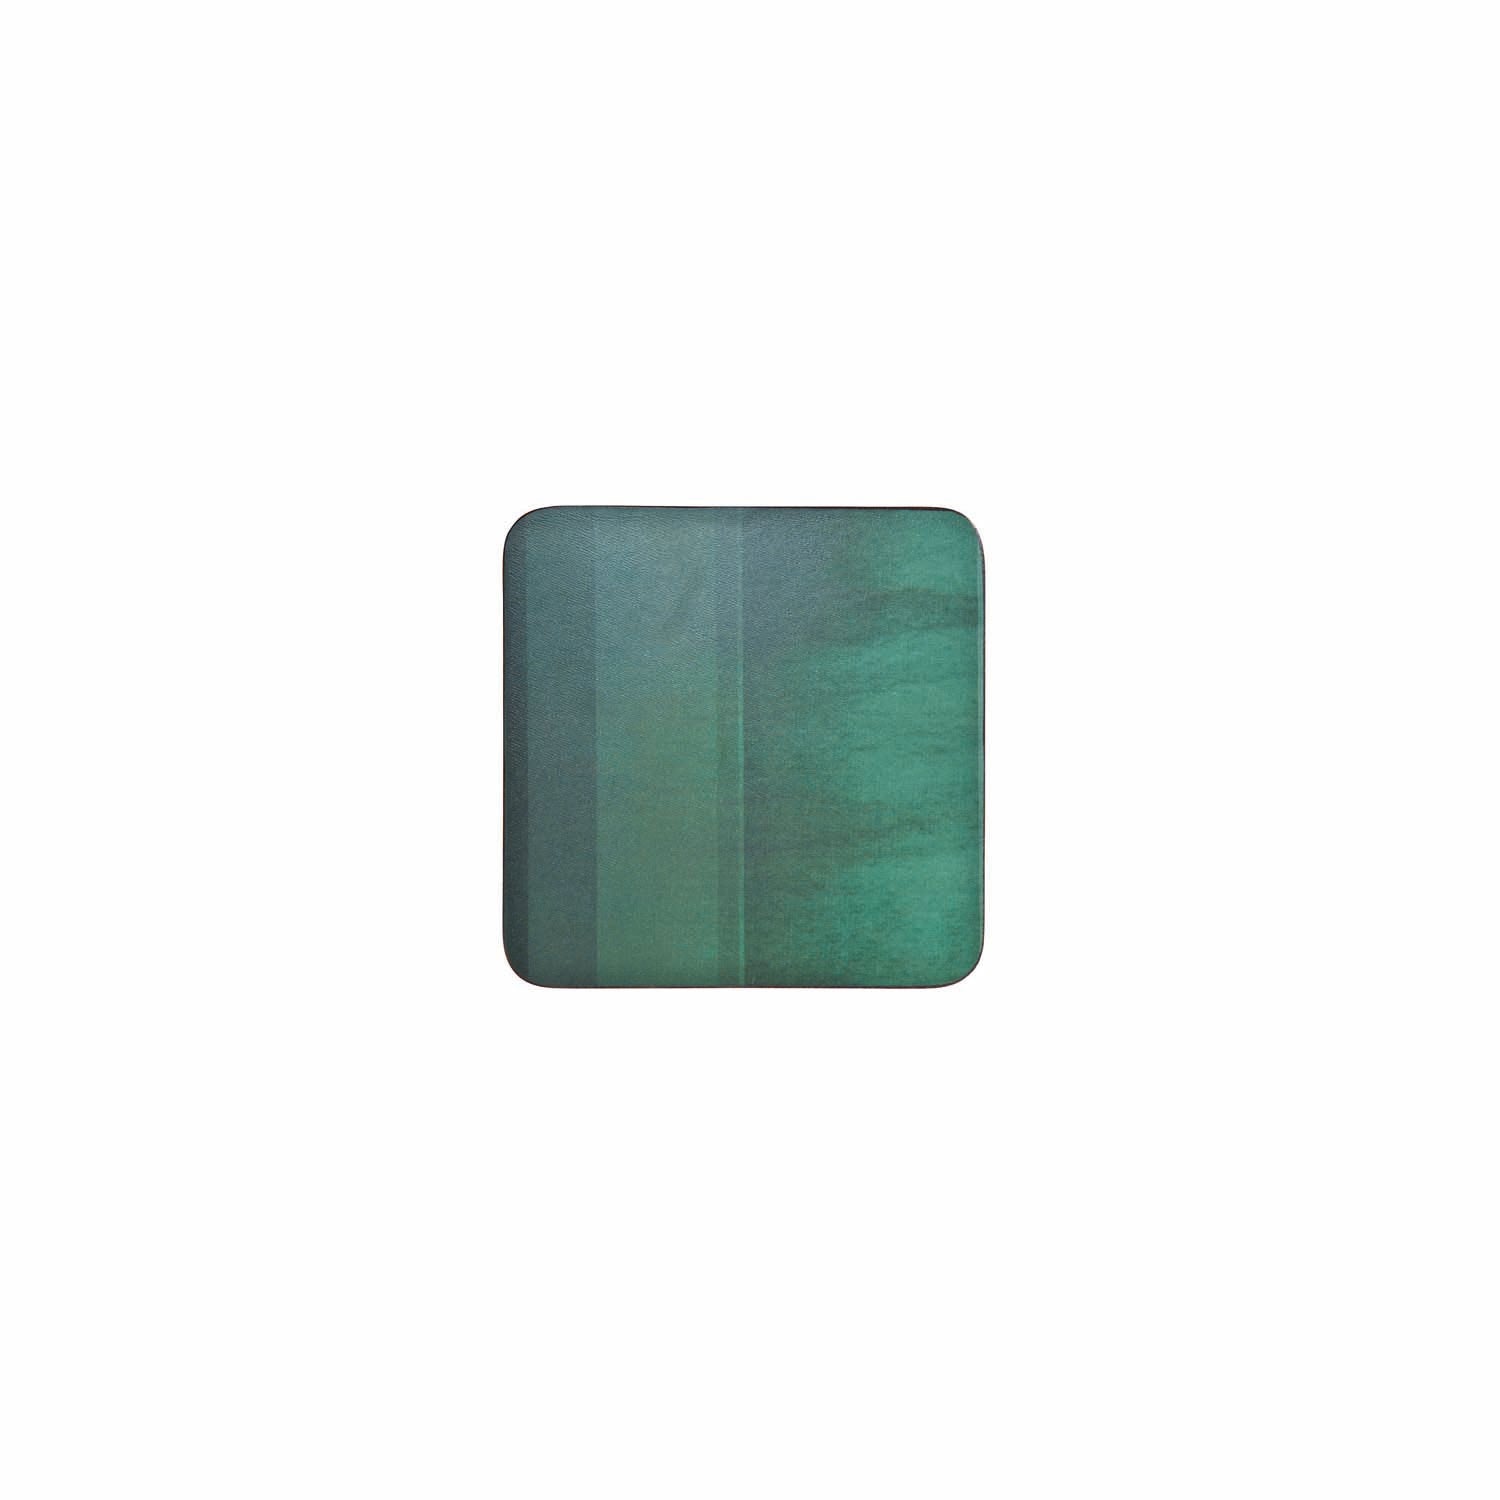 Denby Coasters - Green - Set of 6 1 Shaws Department Stores